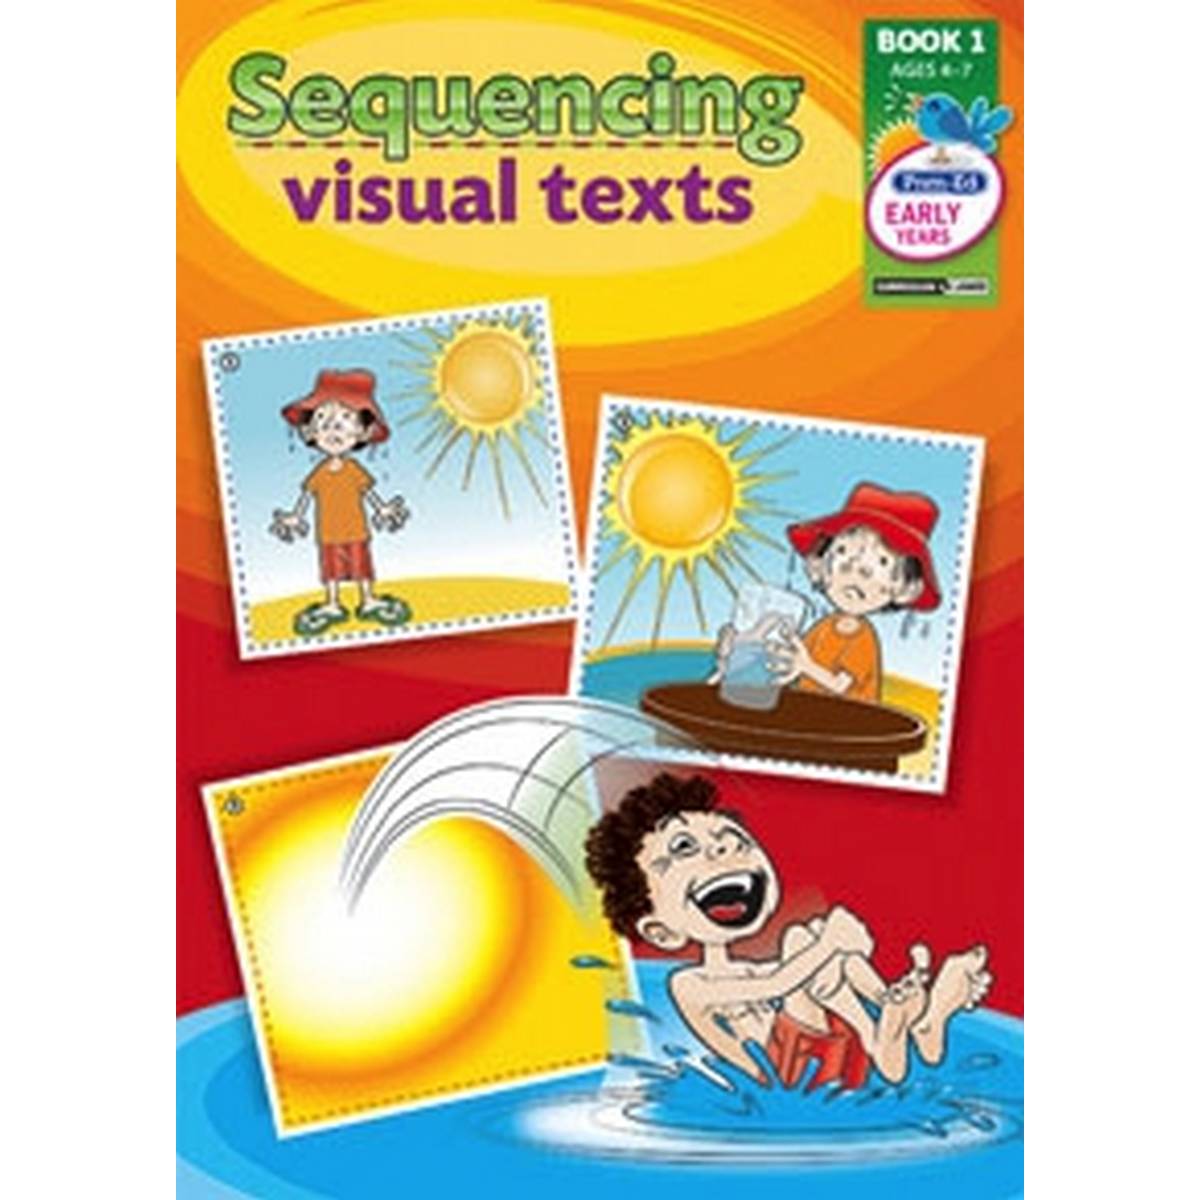 Sequencing Visual Texts Book 1